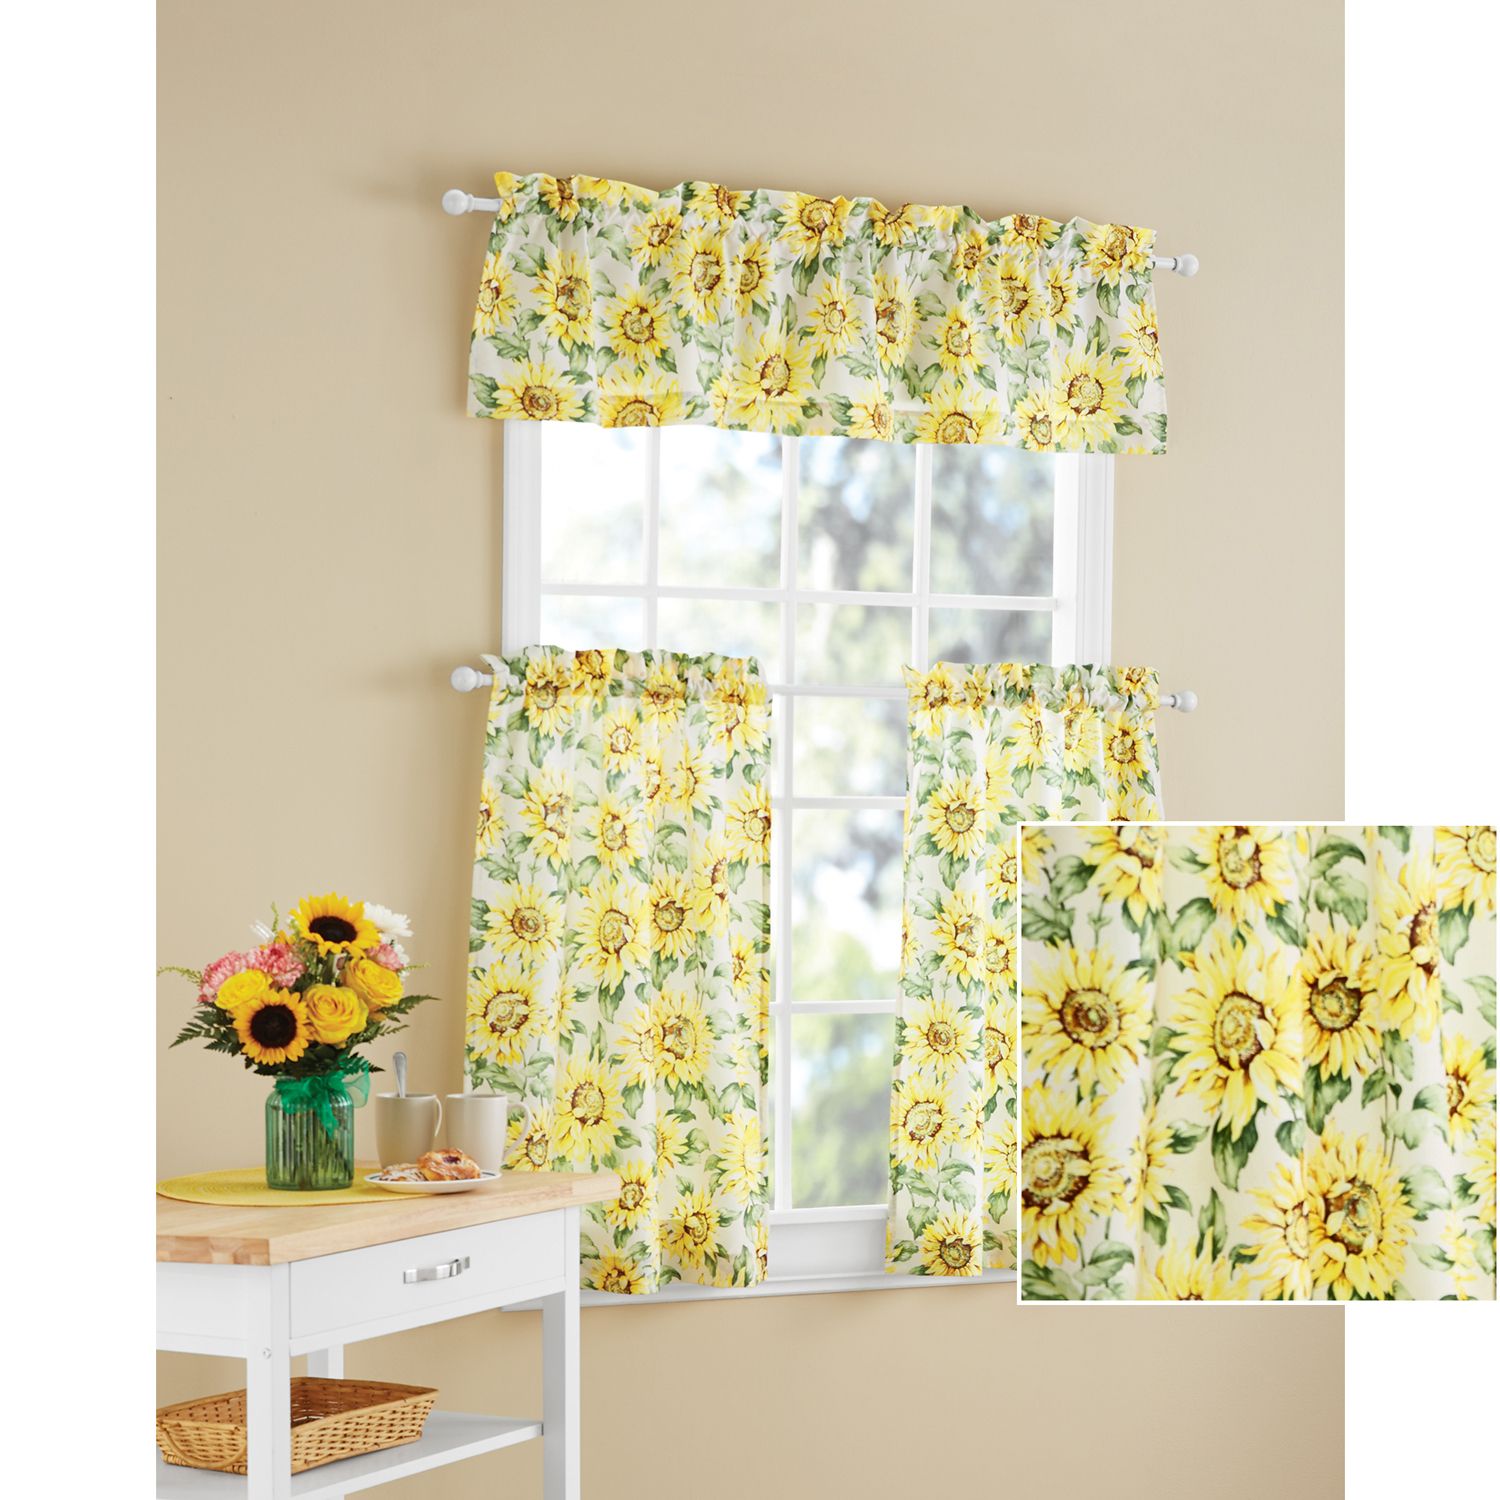 Details About Sunflower 3 Piece Kitchen Curtain Tier And Valance Set Home  Decor Room Window For Sunflower Cottage Kitchen Curtain Tier And Valance Sets (View 5 of 20)